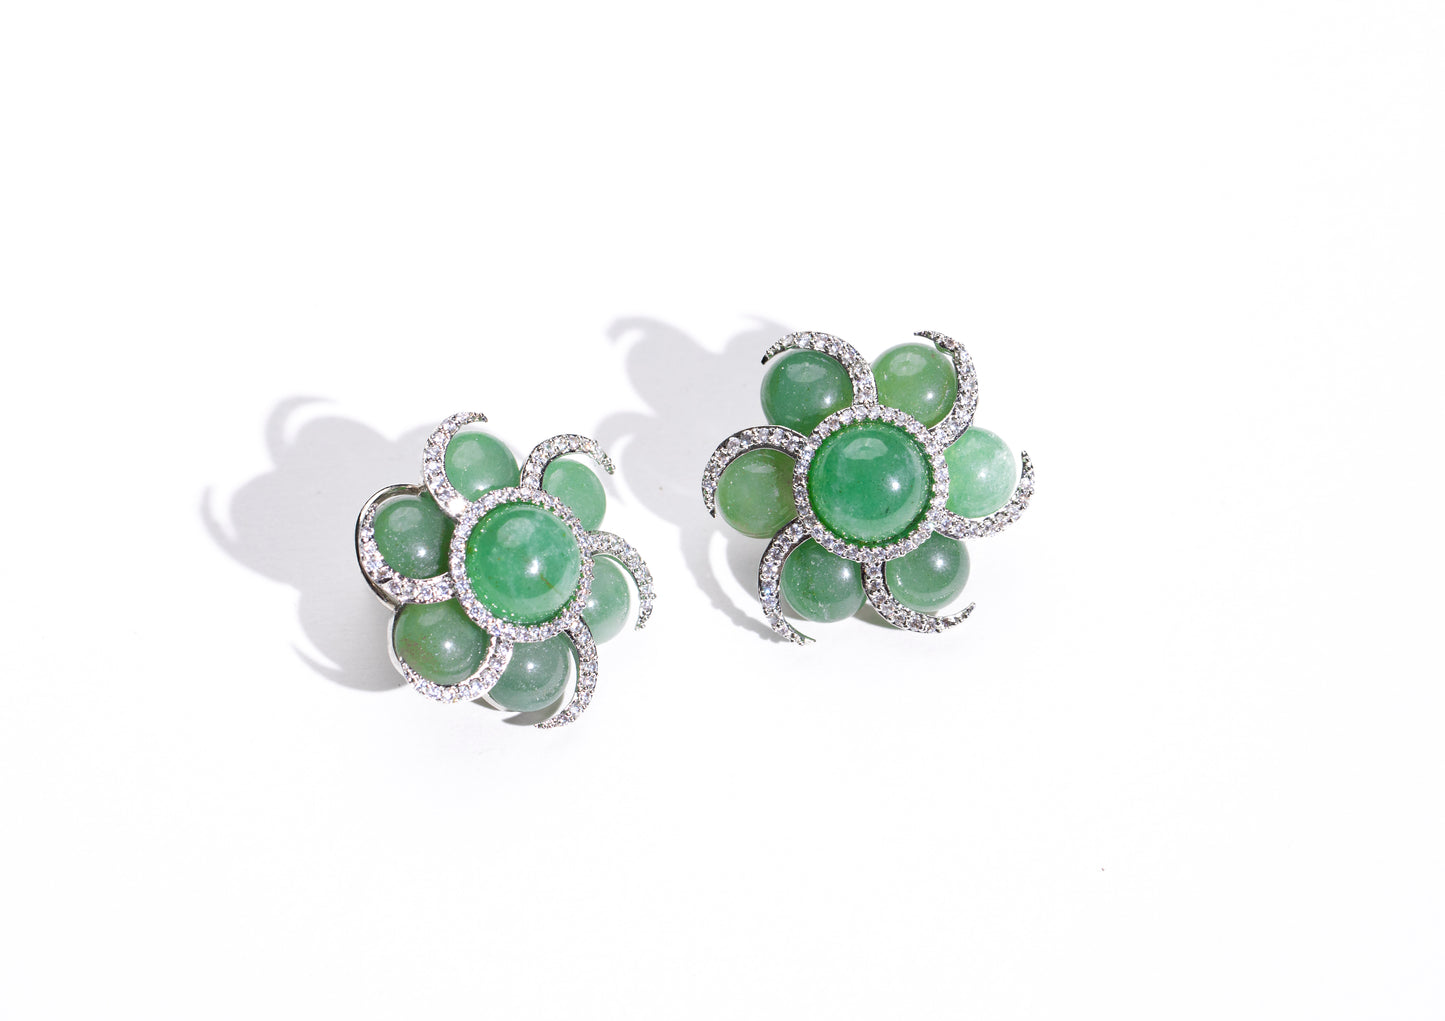 Investment in Jewelry: Green Stone Spiral Flower Earrings: Unique and beautiful design for timeless elegance